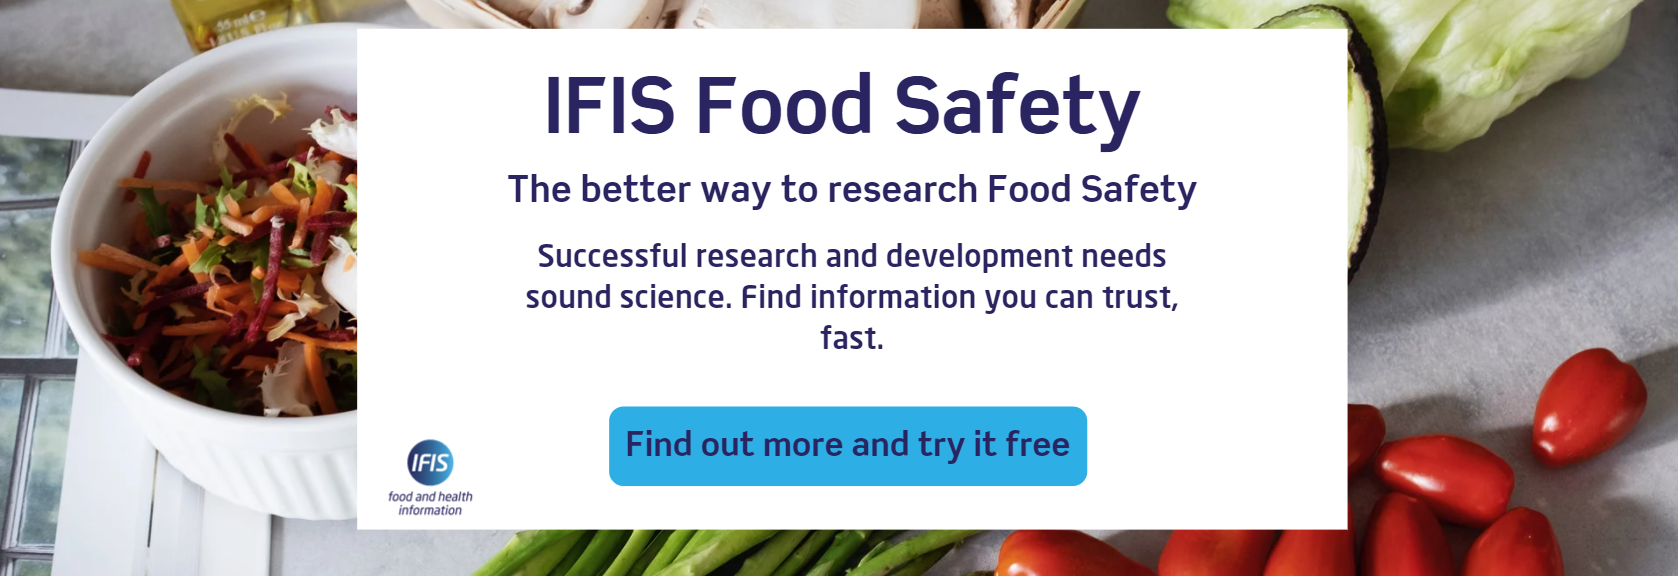 IFIS Food Safety - CTA 2